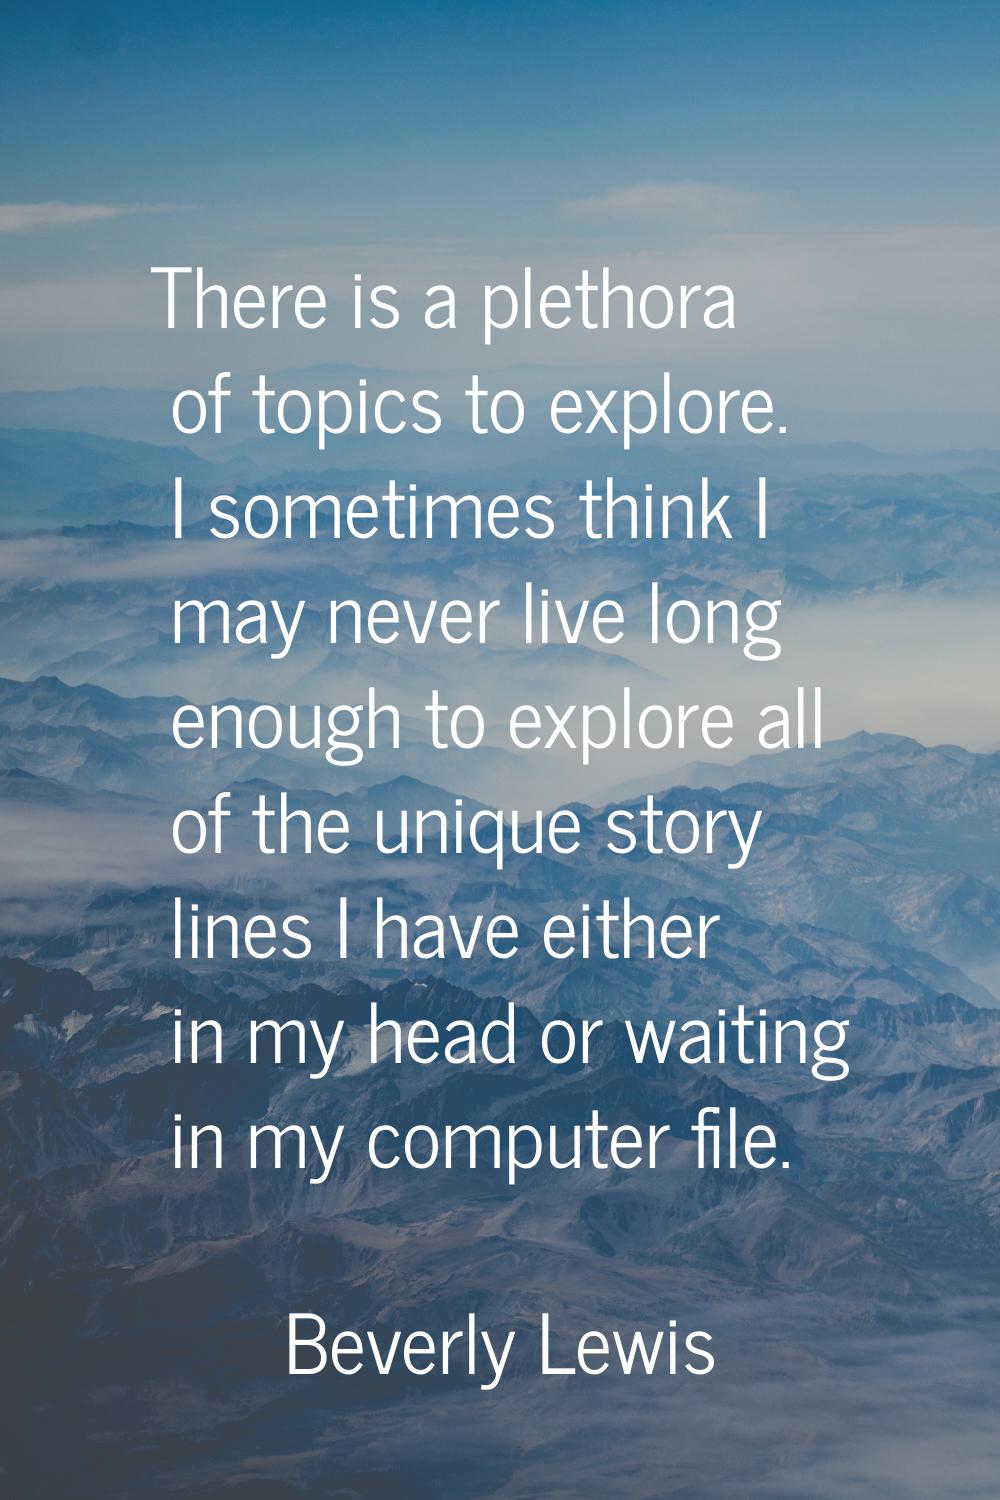 There is a plethora of topics to explore. I sometimes think I may never live long enough to explore